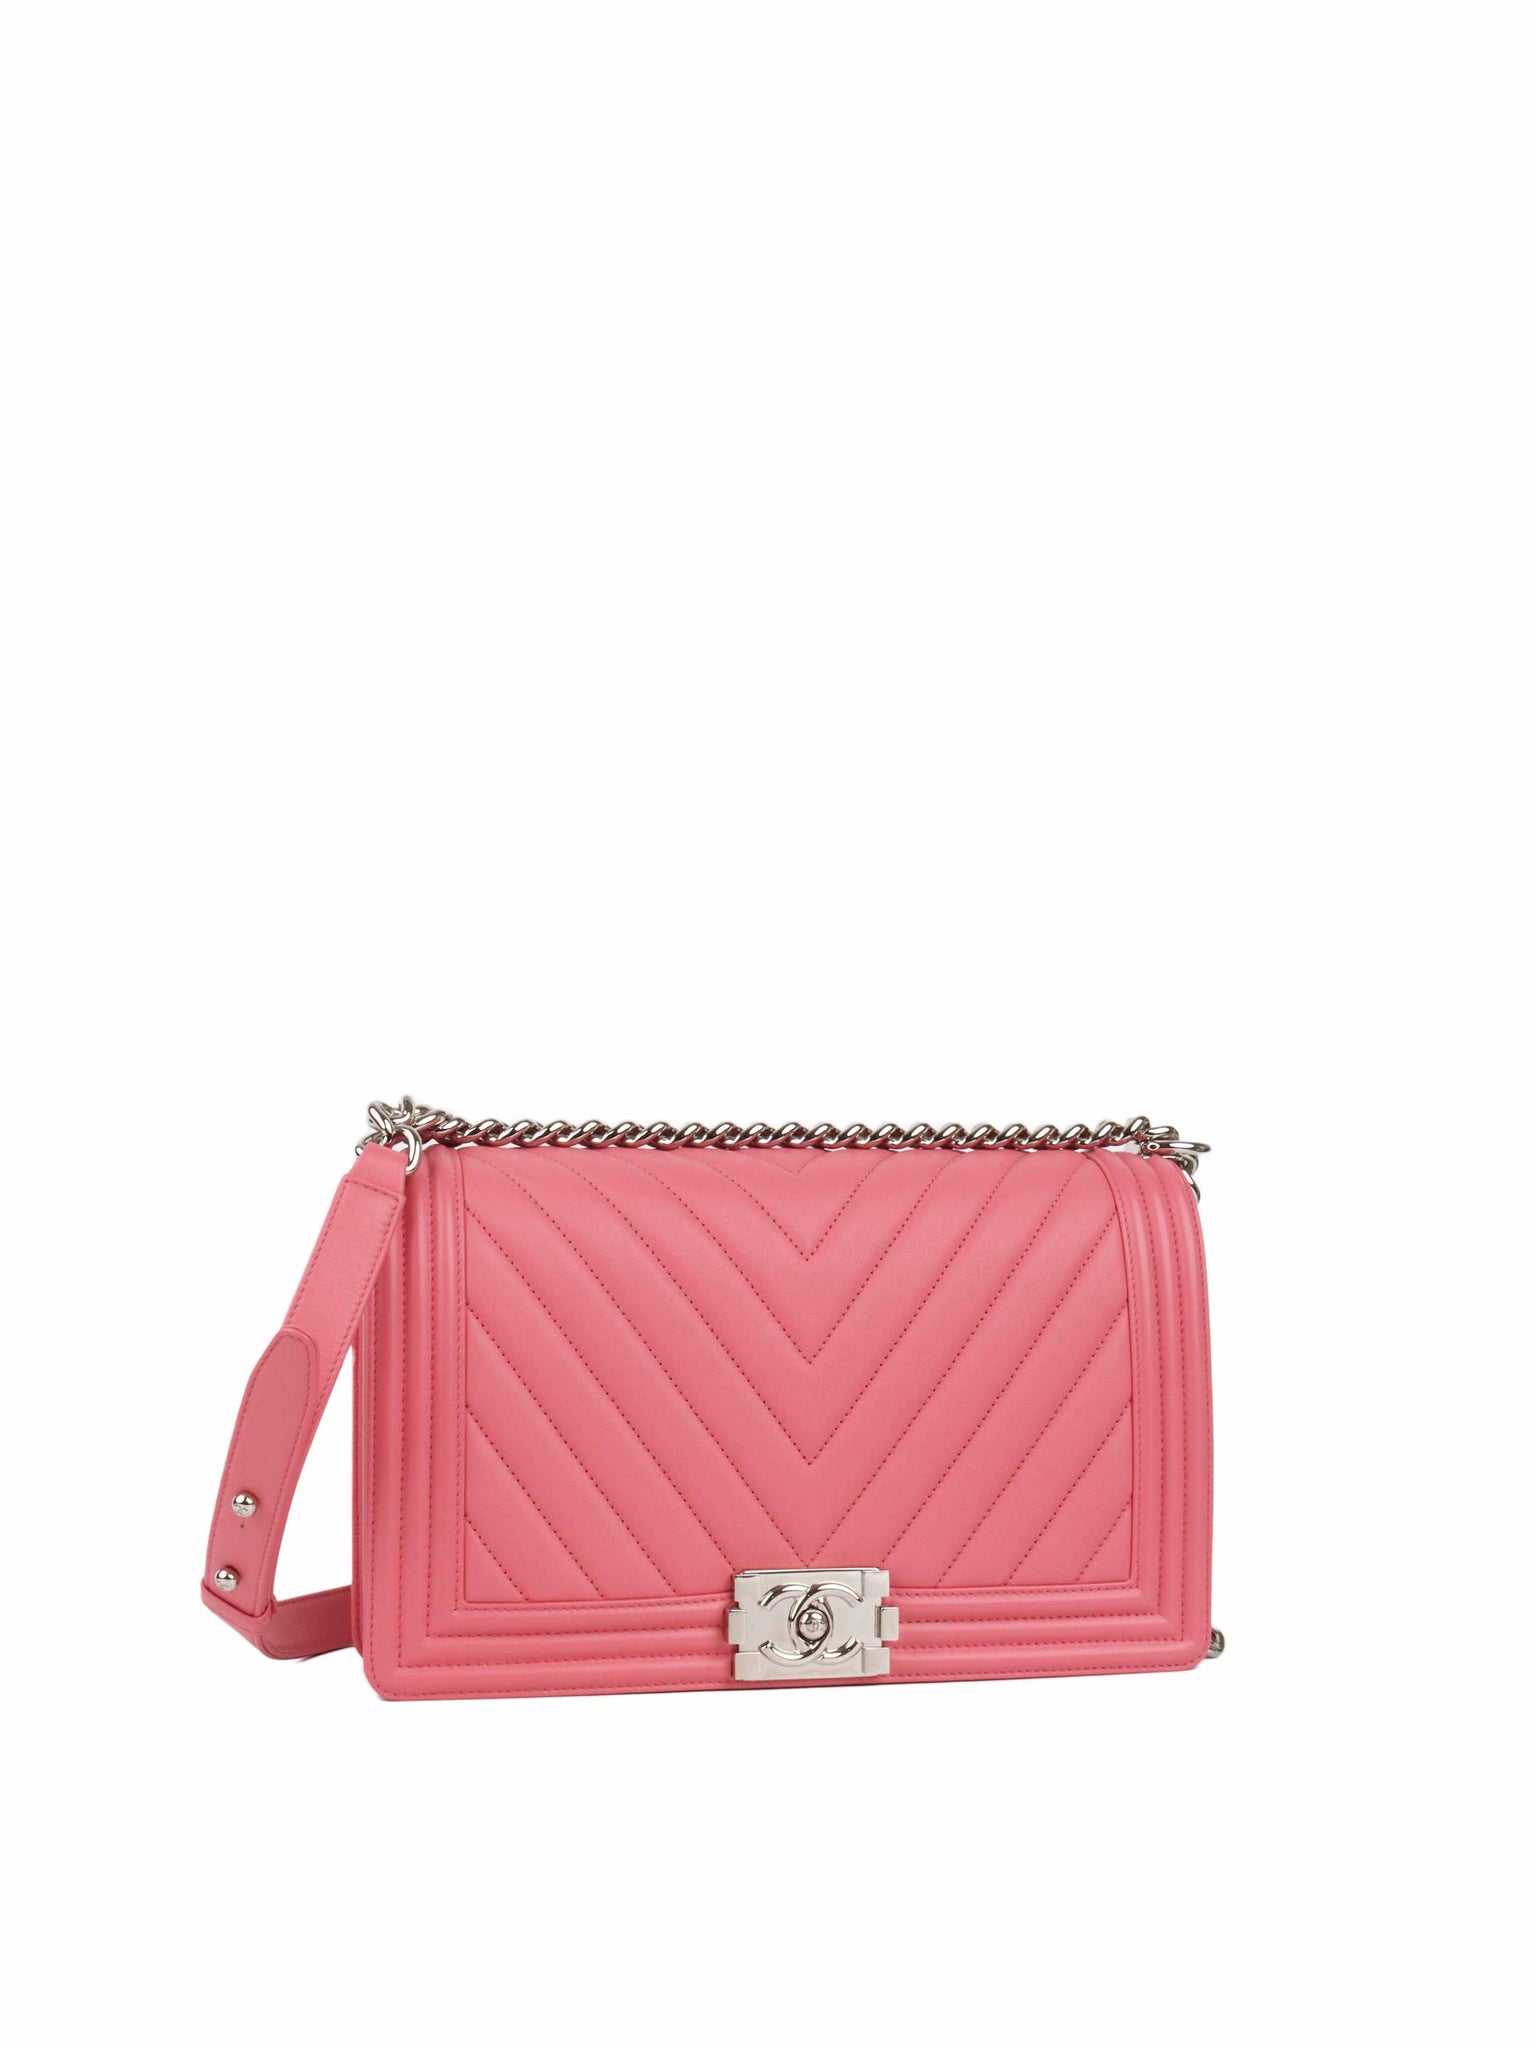 Chanel Blush Pink Small C19 Bag – Votre Luxe